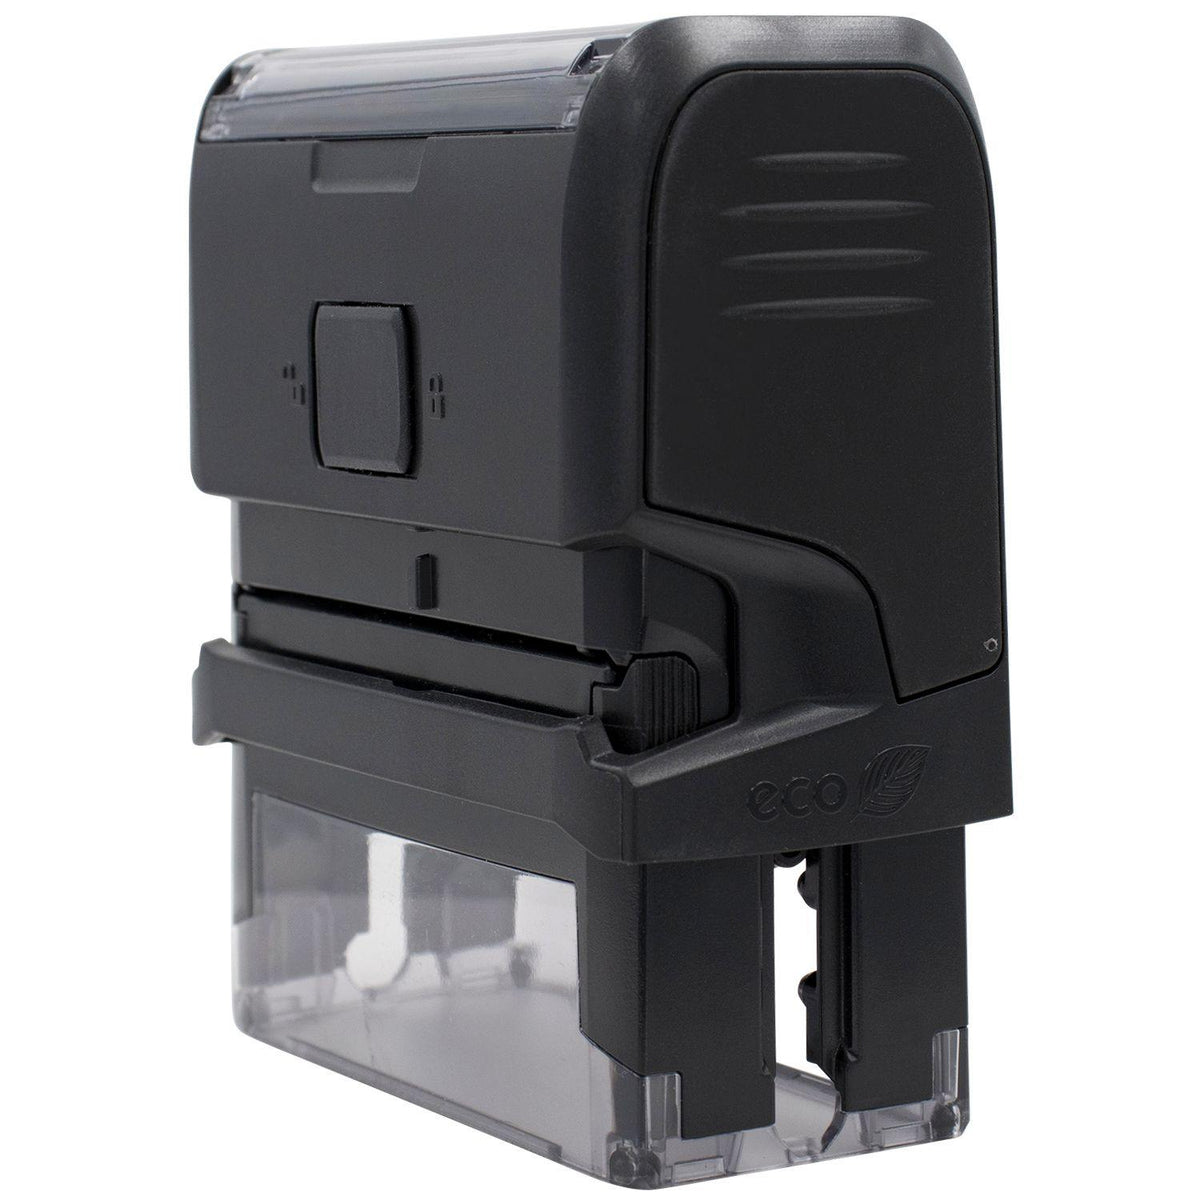 Self Inking Damages Stamp - Engineer Seal Stamps - Brand_Trodat, Impression Size_Small, Stamp Type_Self-Inking Stamp, Type of Use_Postal &amp; Mailing, Type of Use_Shipping &amp; Receiving